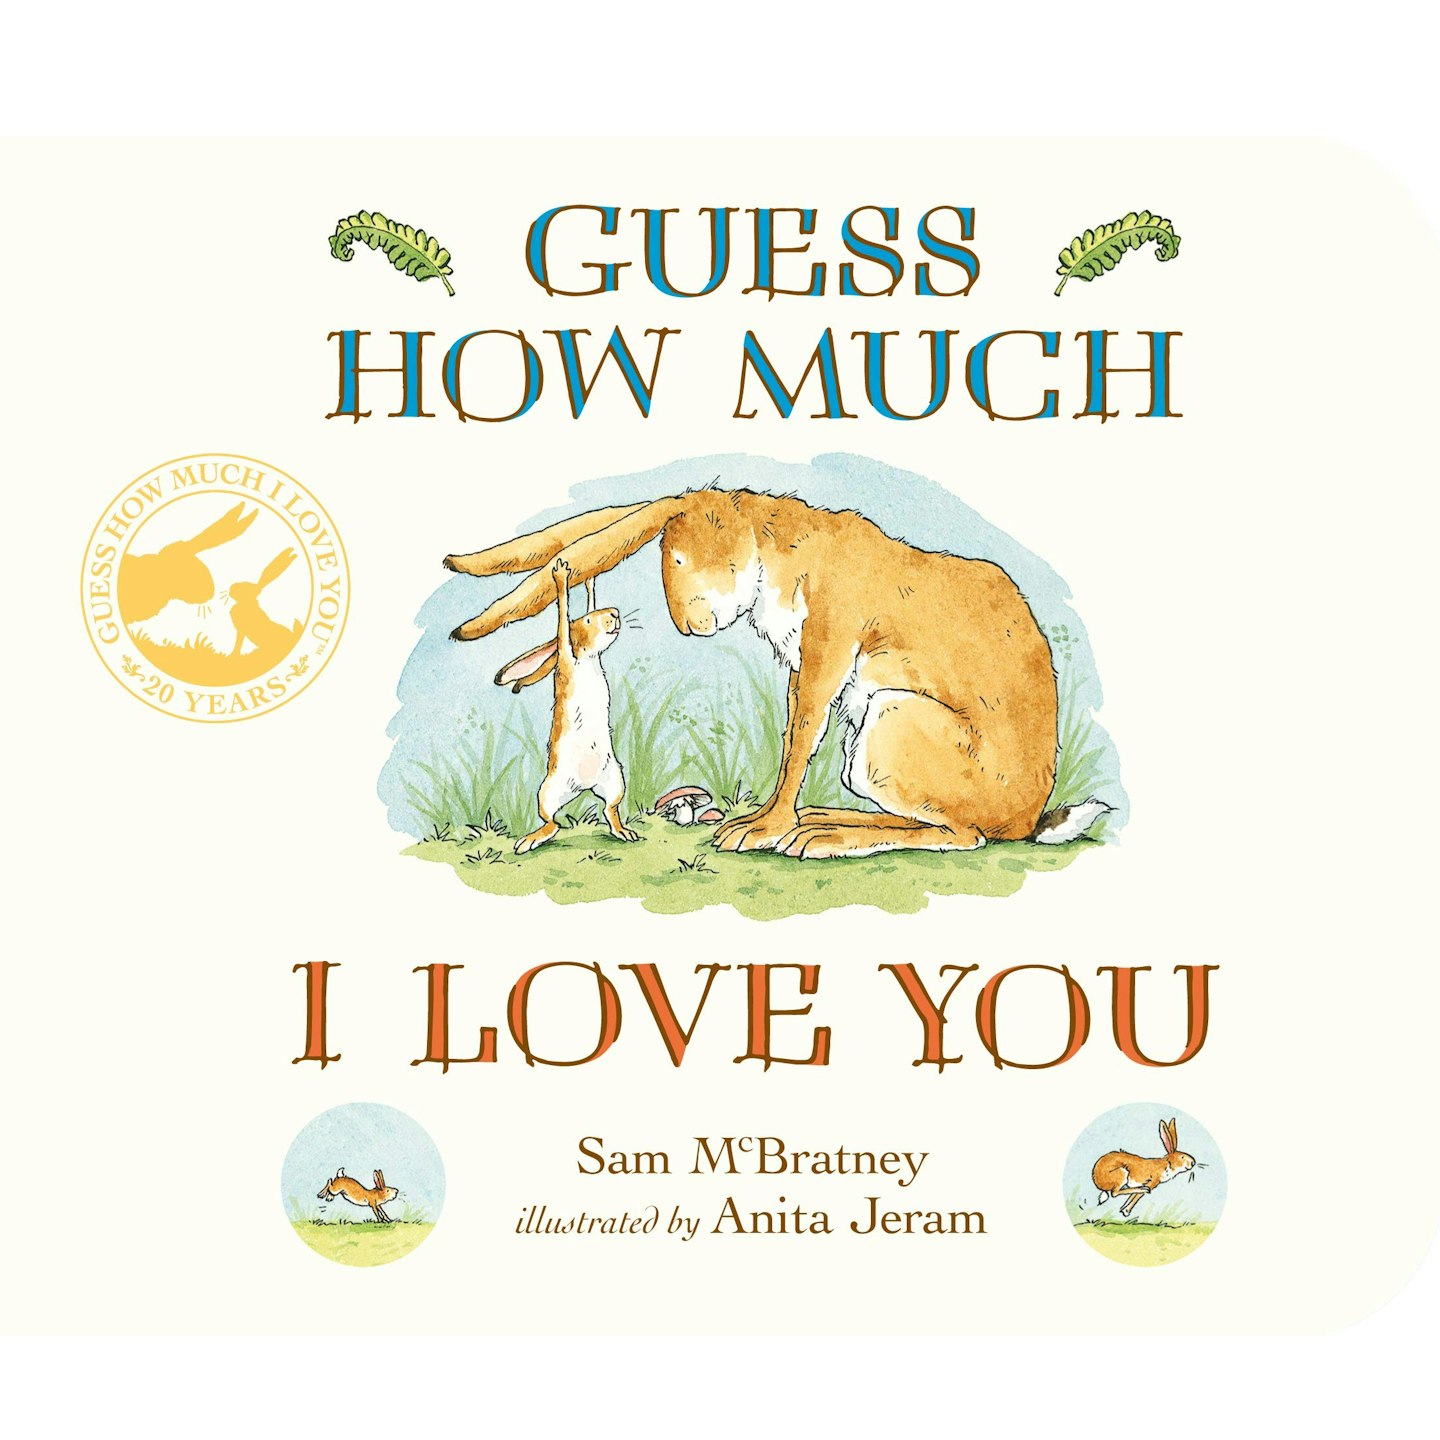 Guess How Much I Love You by Sam McBratney  and Anita Jeram